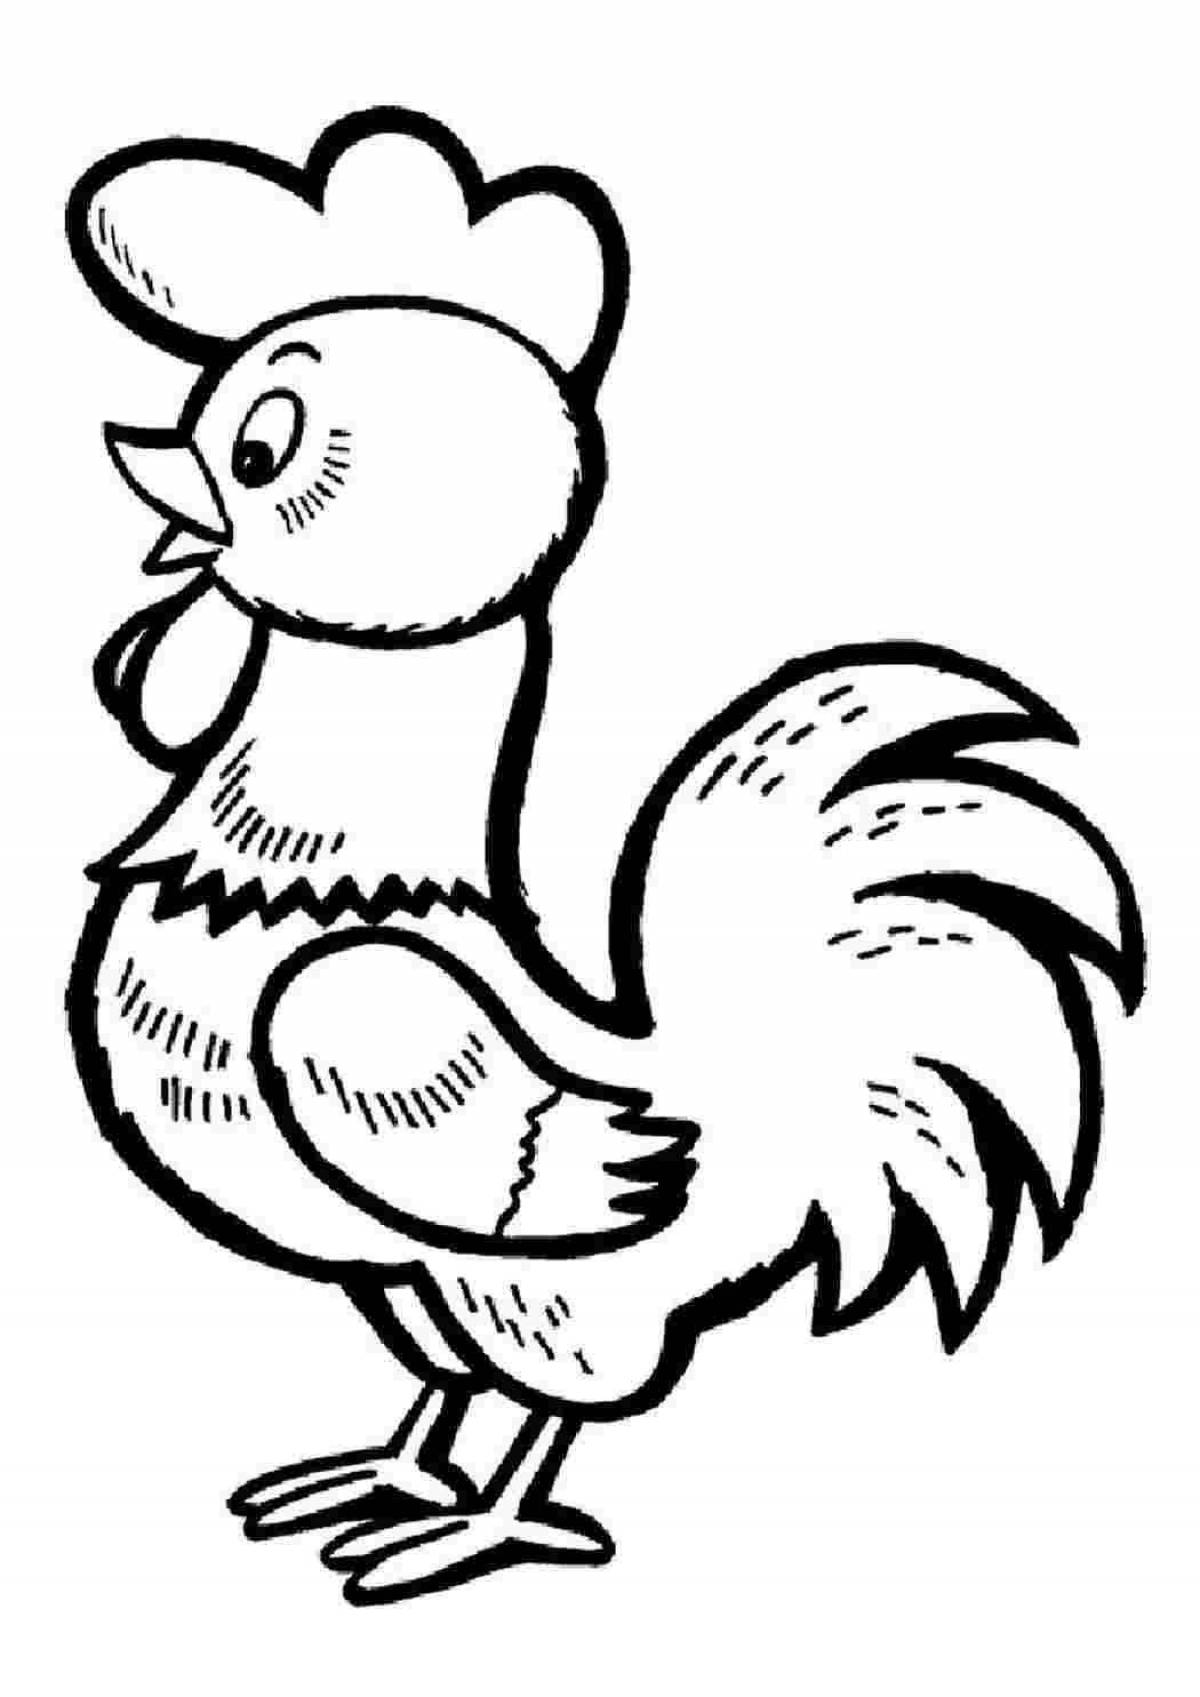 Coloring book colorful rooster for preschoolers 3-4 years old